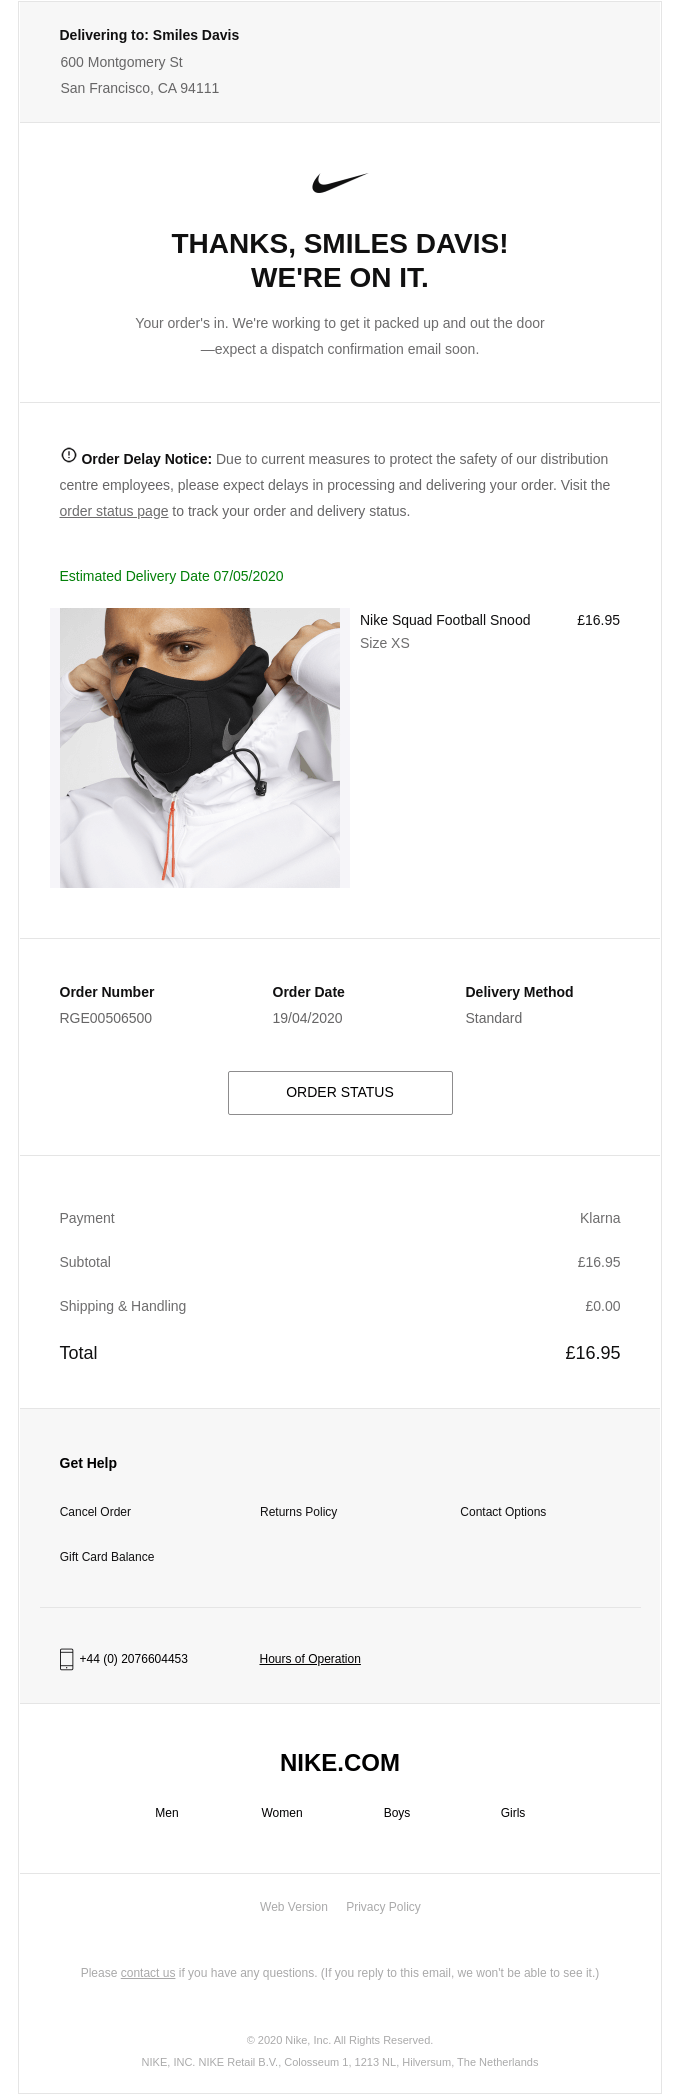 Order Received (Nike.com #RGE00506500) | Really Good Emails How Can I Cancel My Nike Order